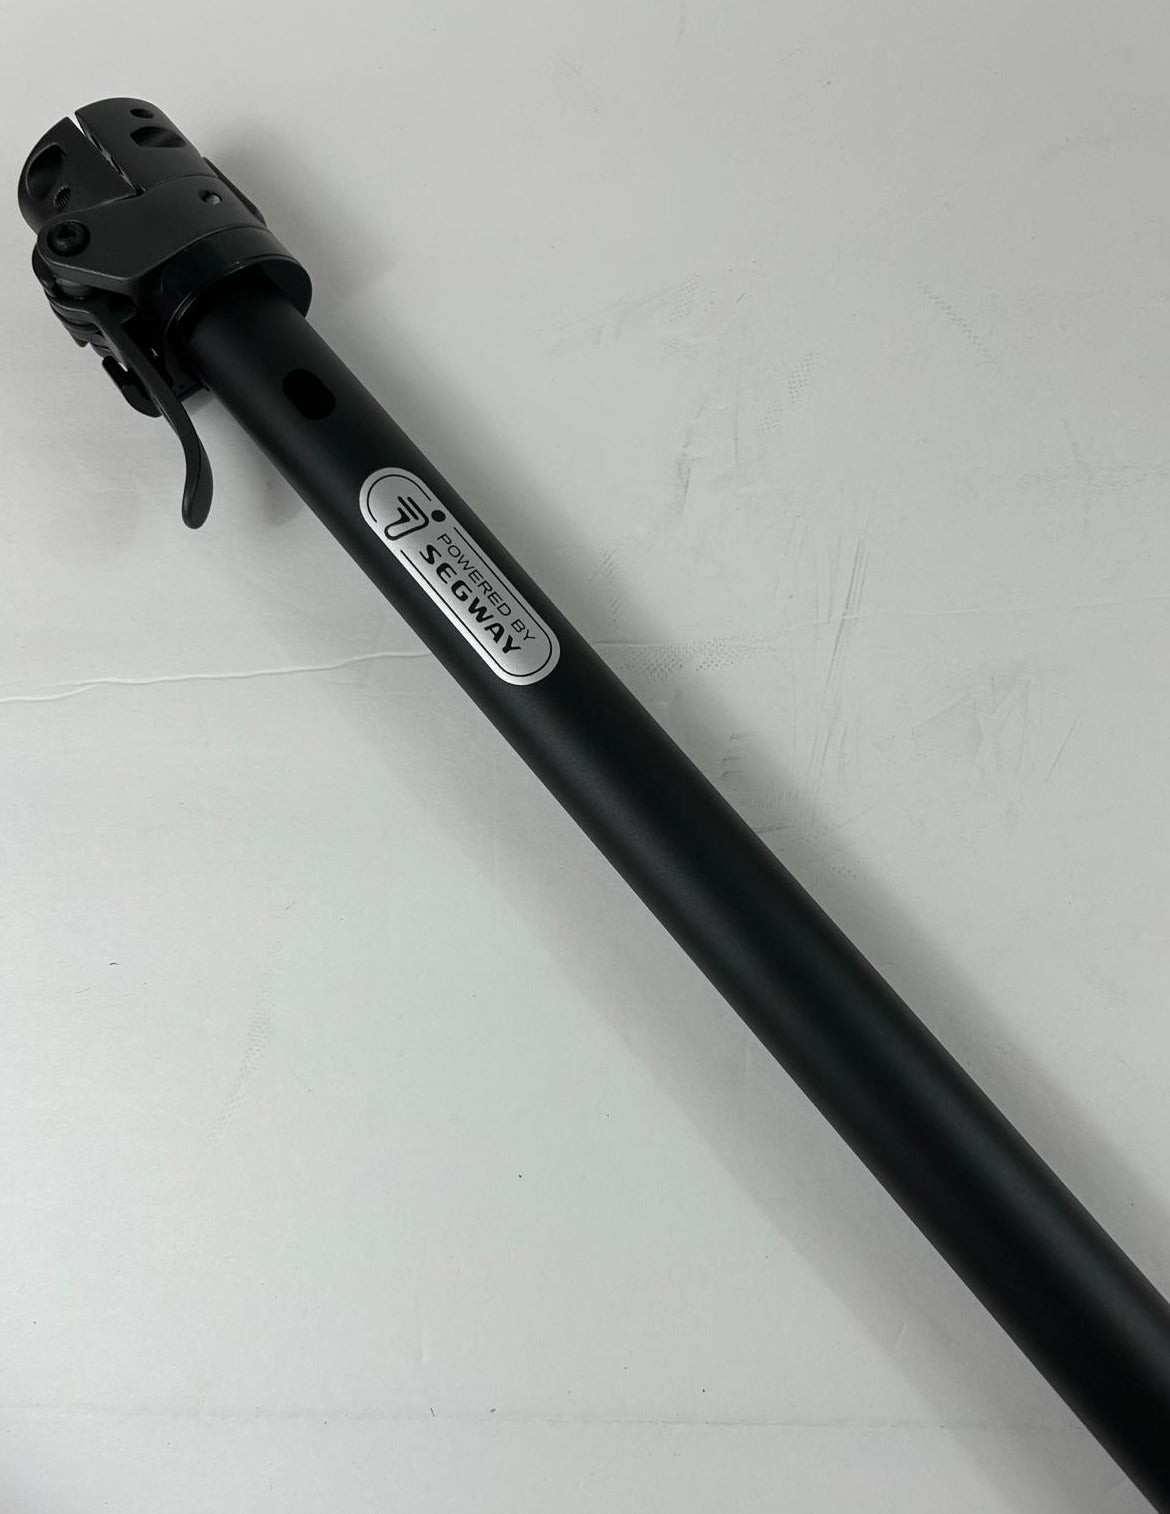 Folding stem pole for NInebot F Series Kick Scooters (F25 and F30)